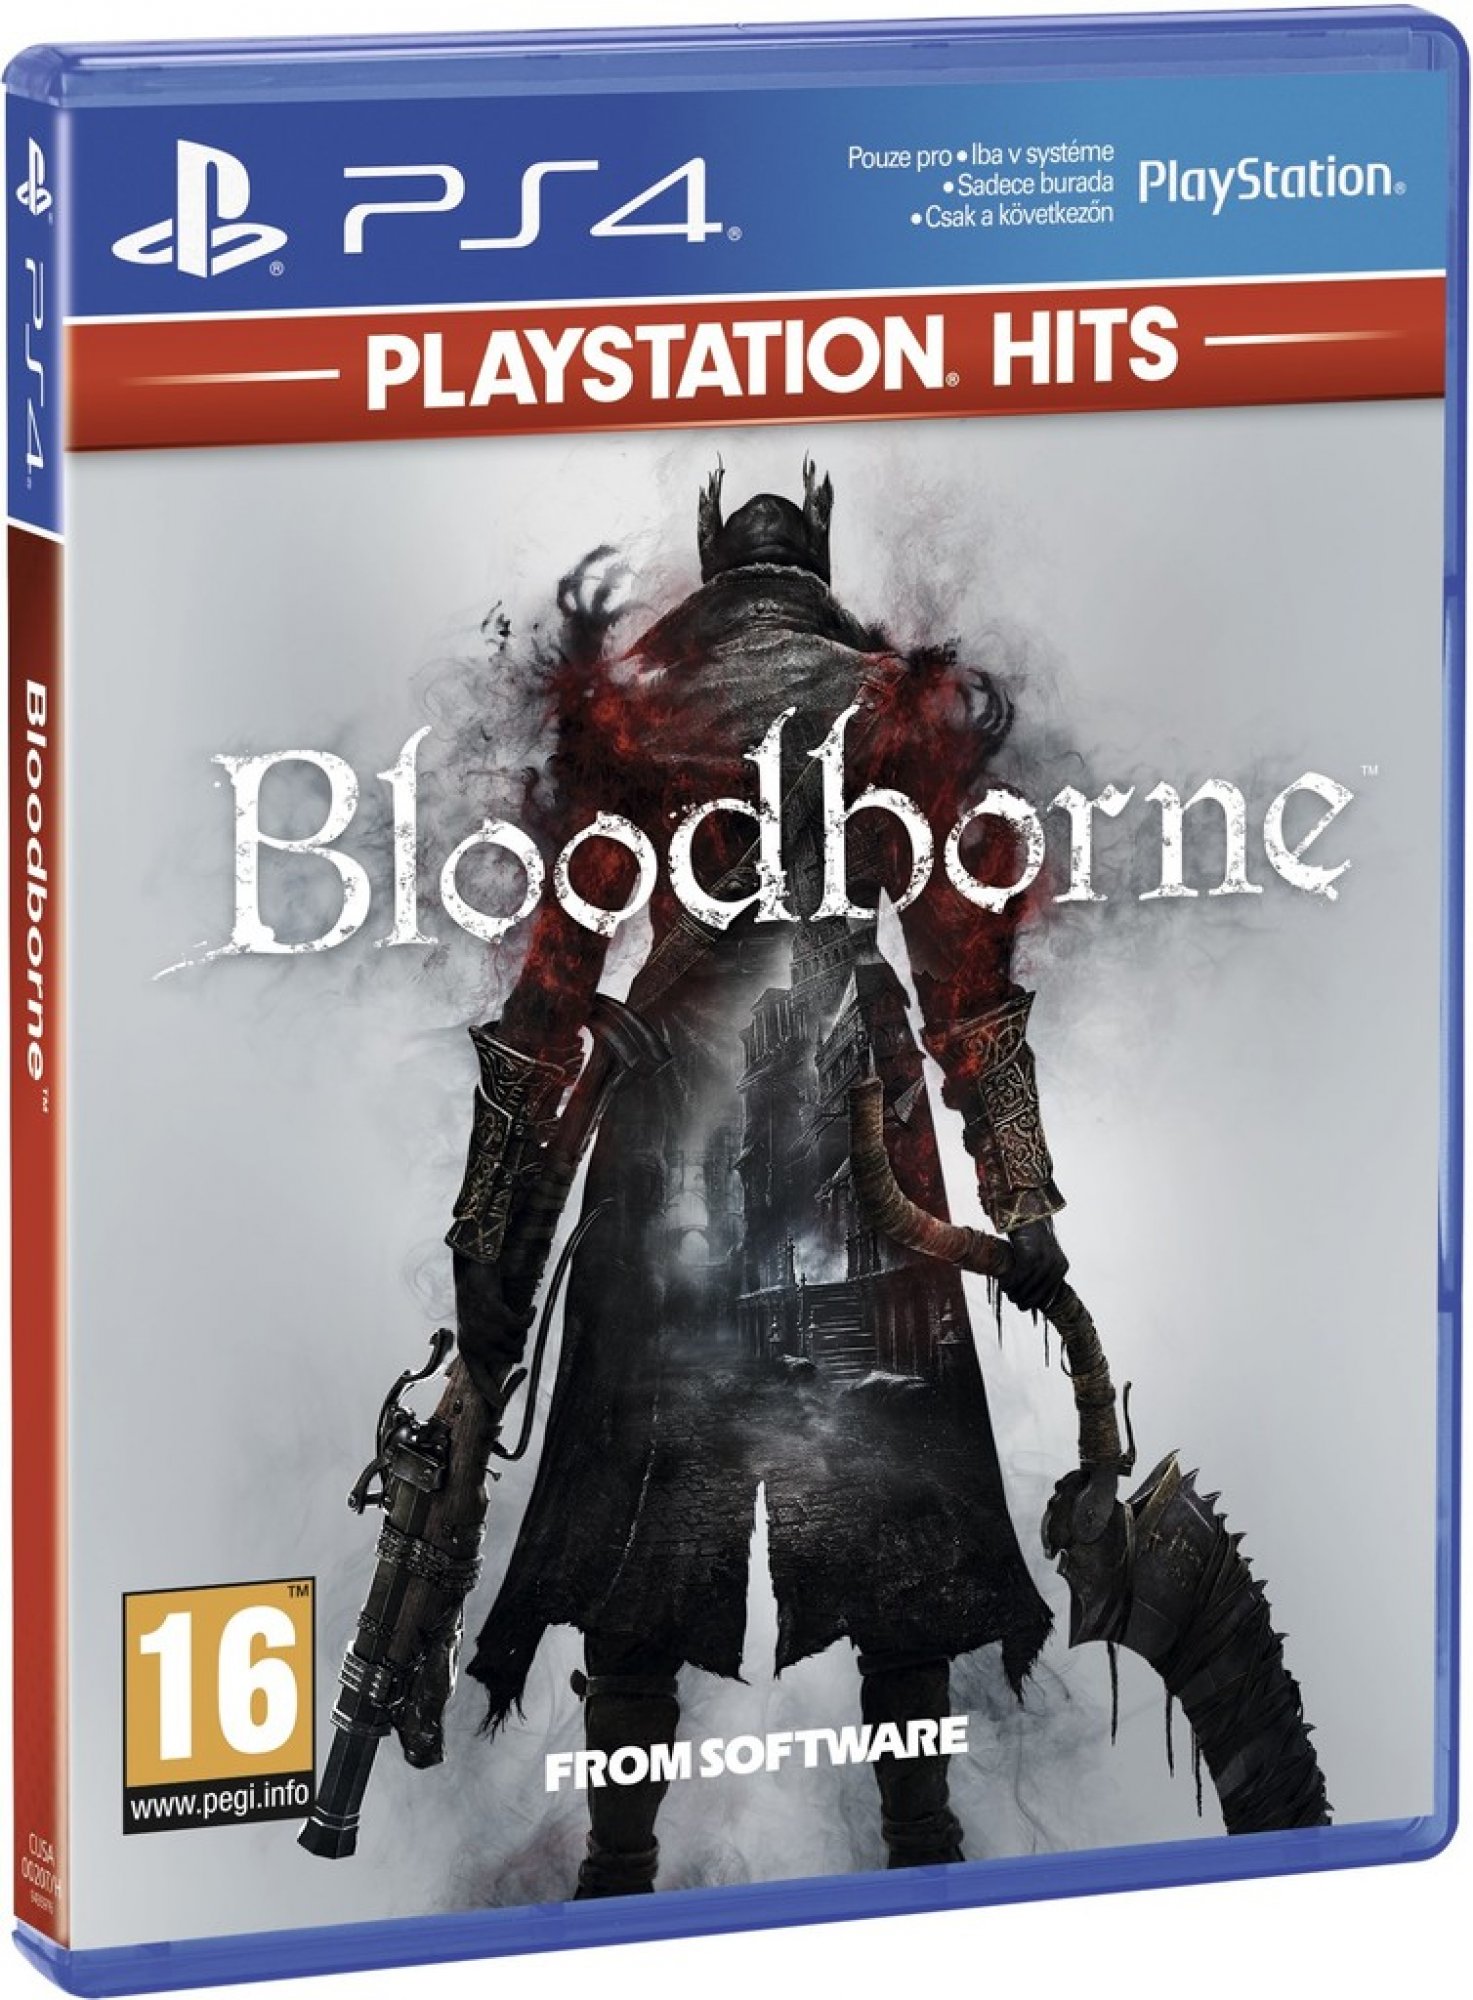 HITS Bloodborne (PS4) PS719435976